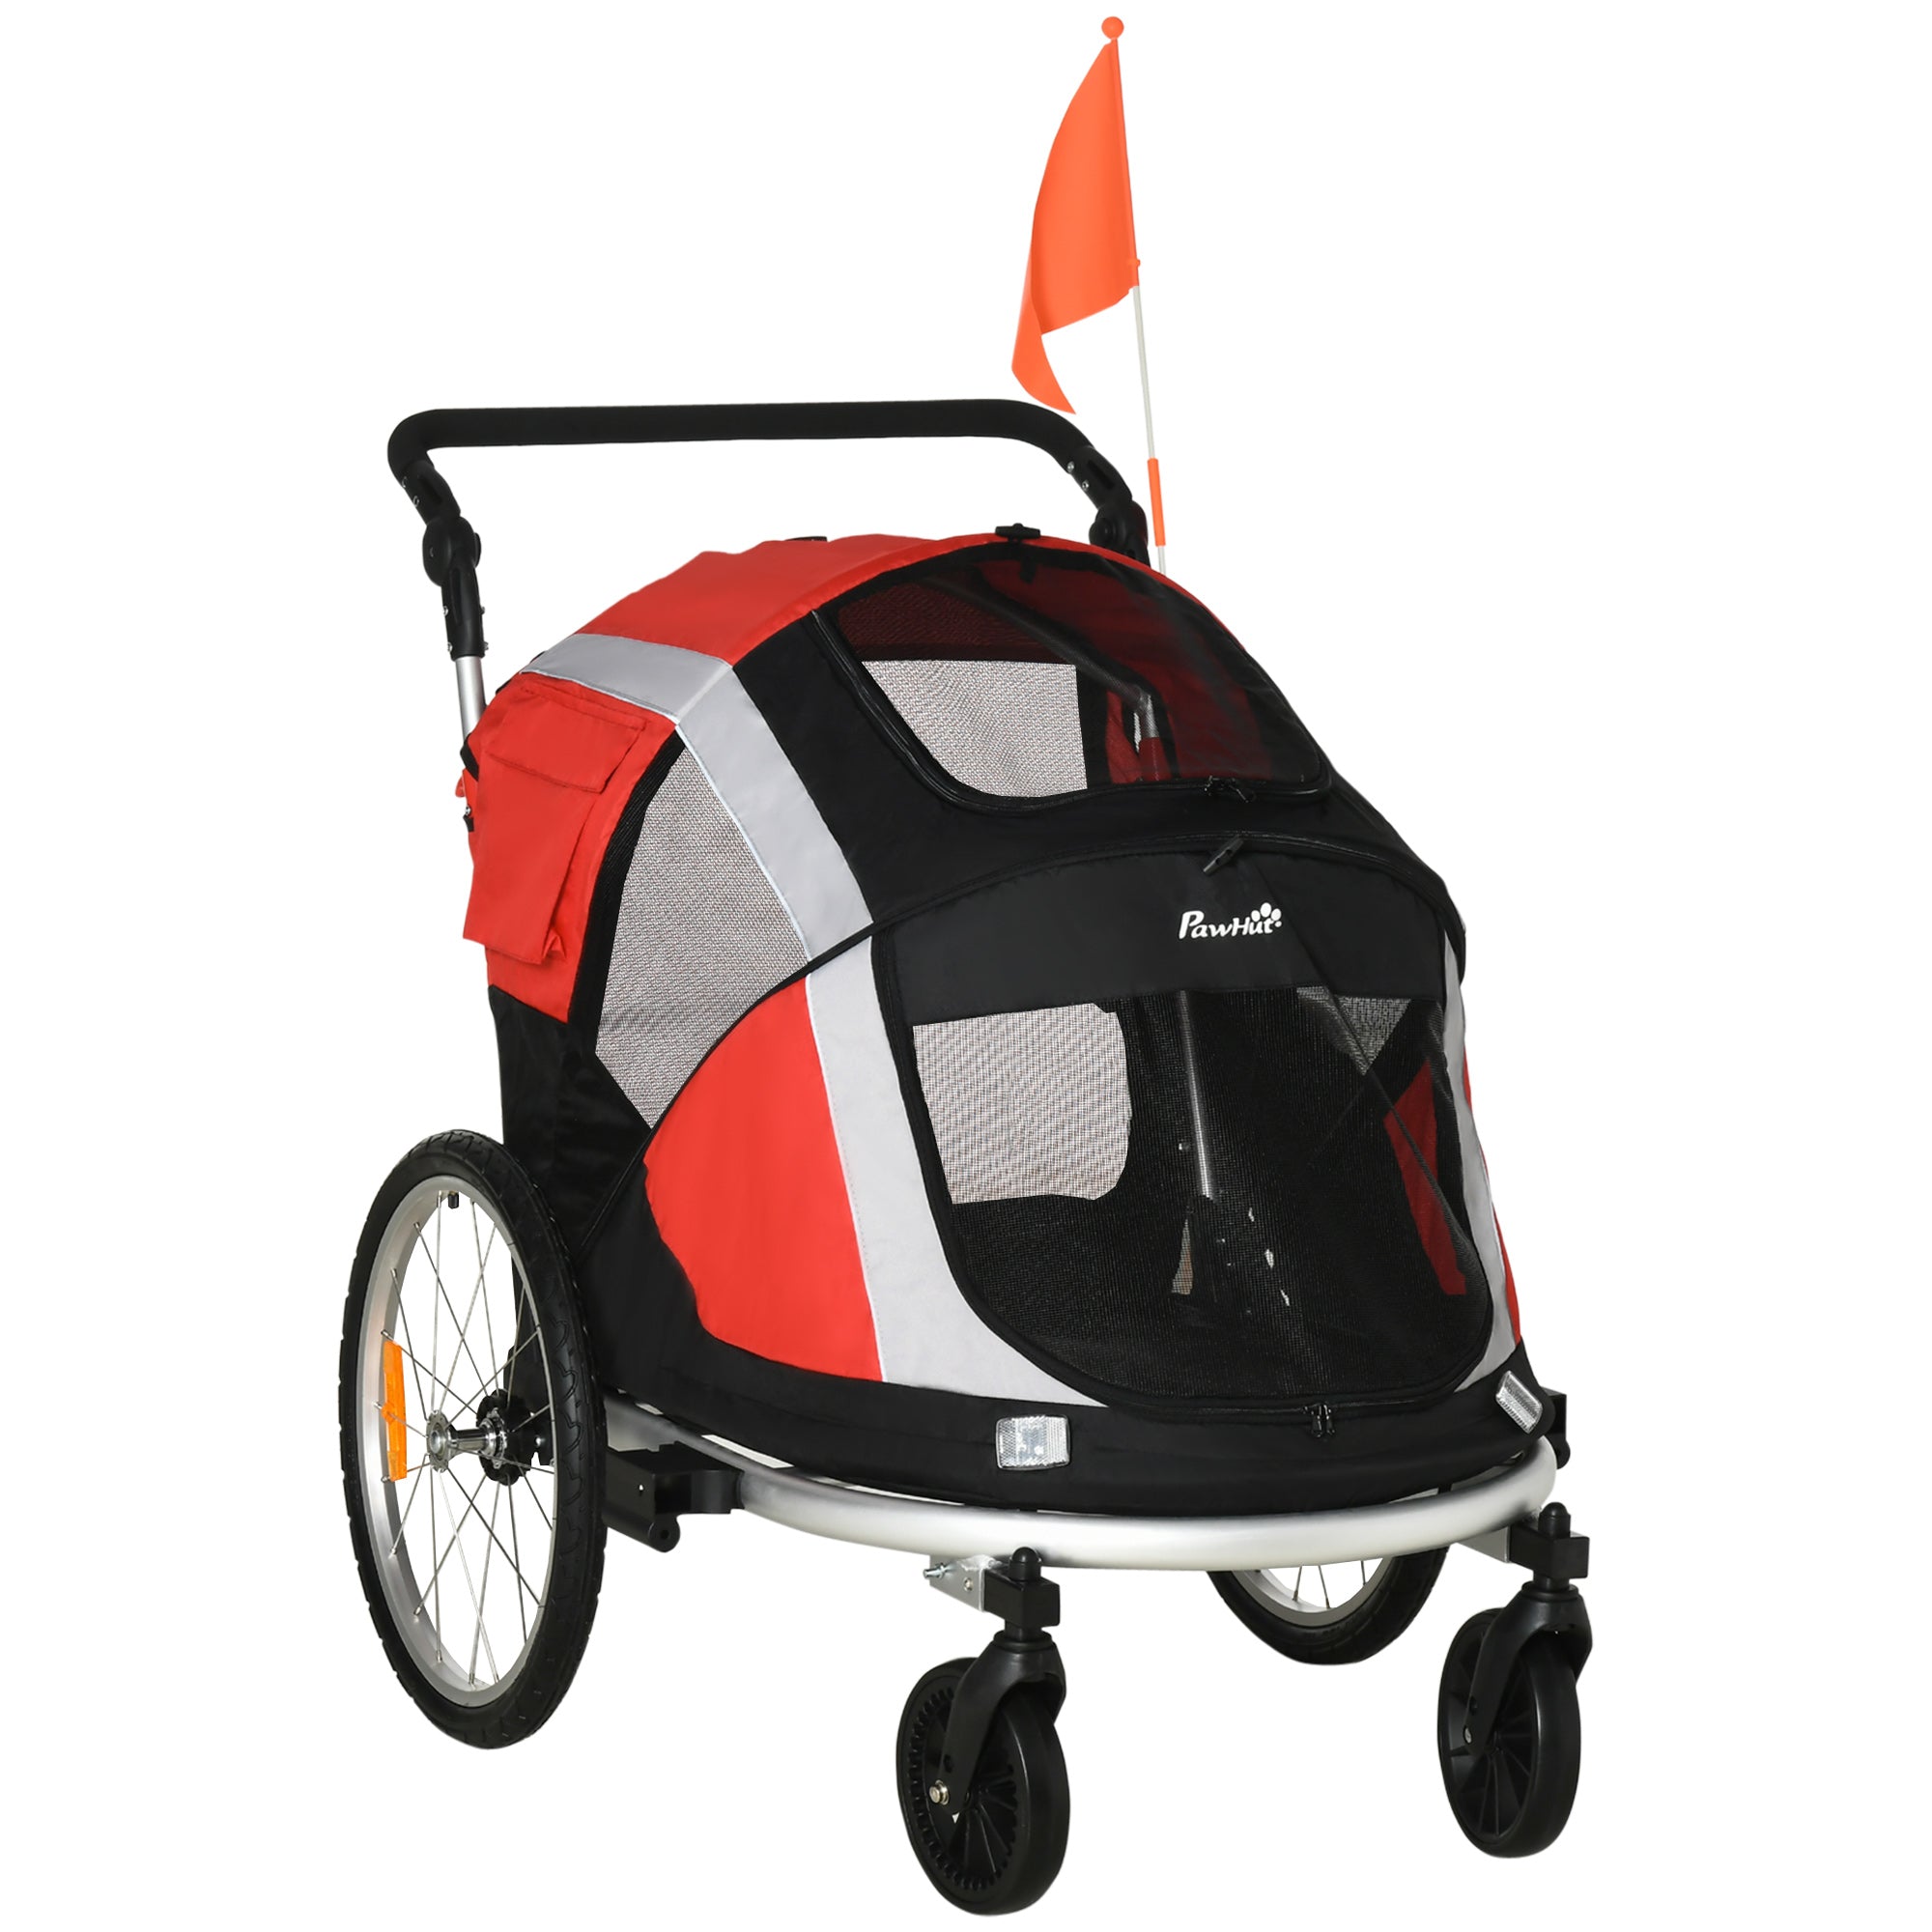 PawHut 2-in-1 Dog Bicycle Trailer w/ Safety Leash, Reflectors - Red